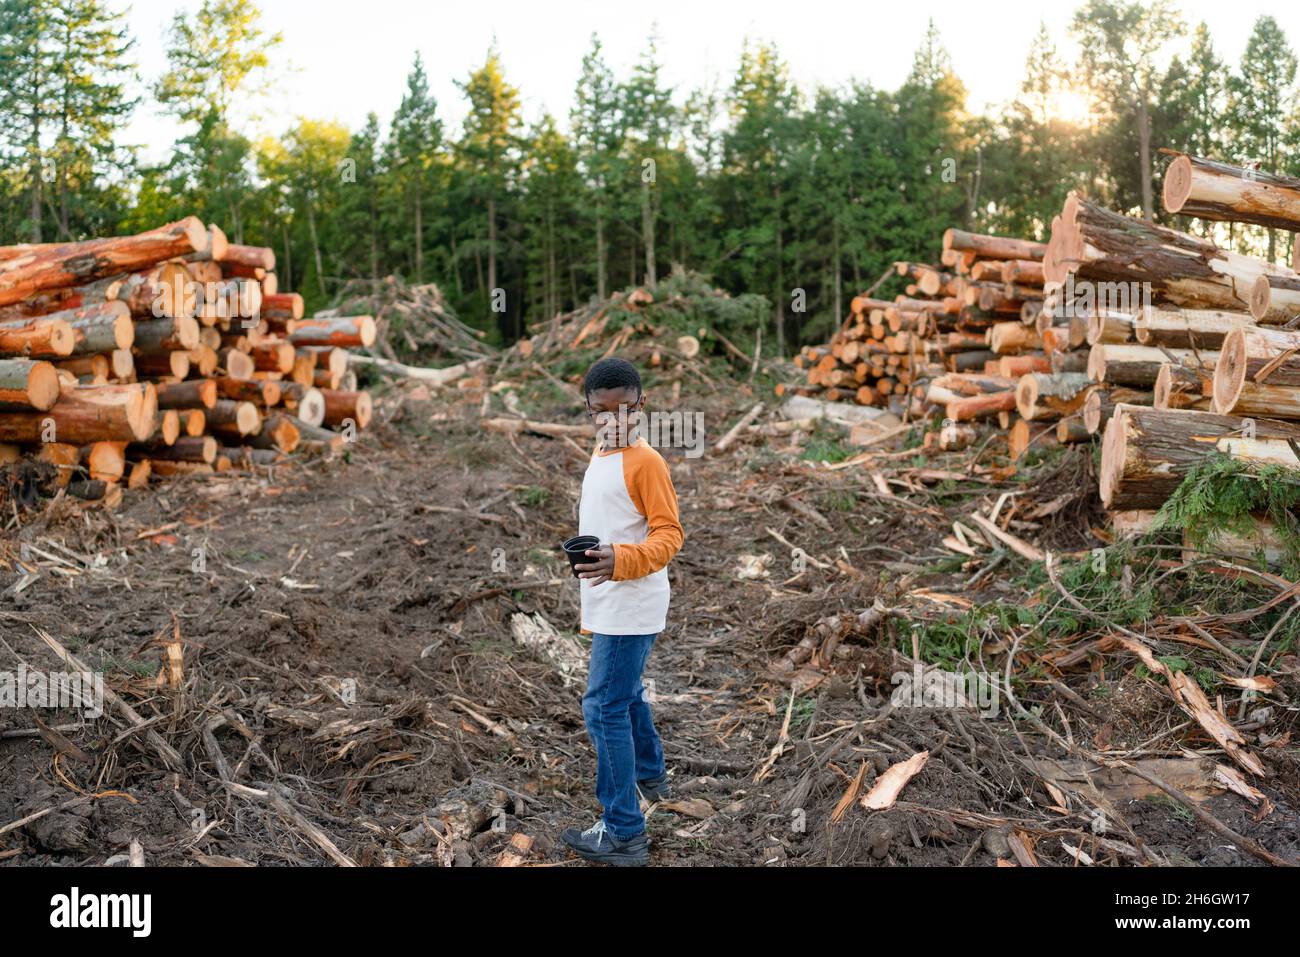 Young black boy stands alone on logging site surrounded by stacked logs and muddy ground. Stock Photo